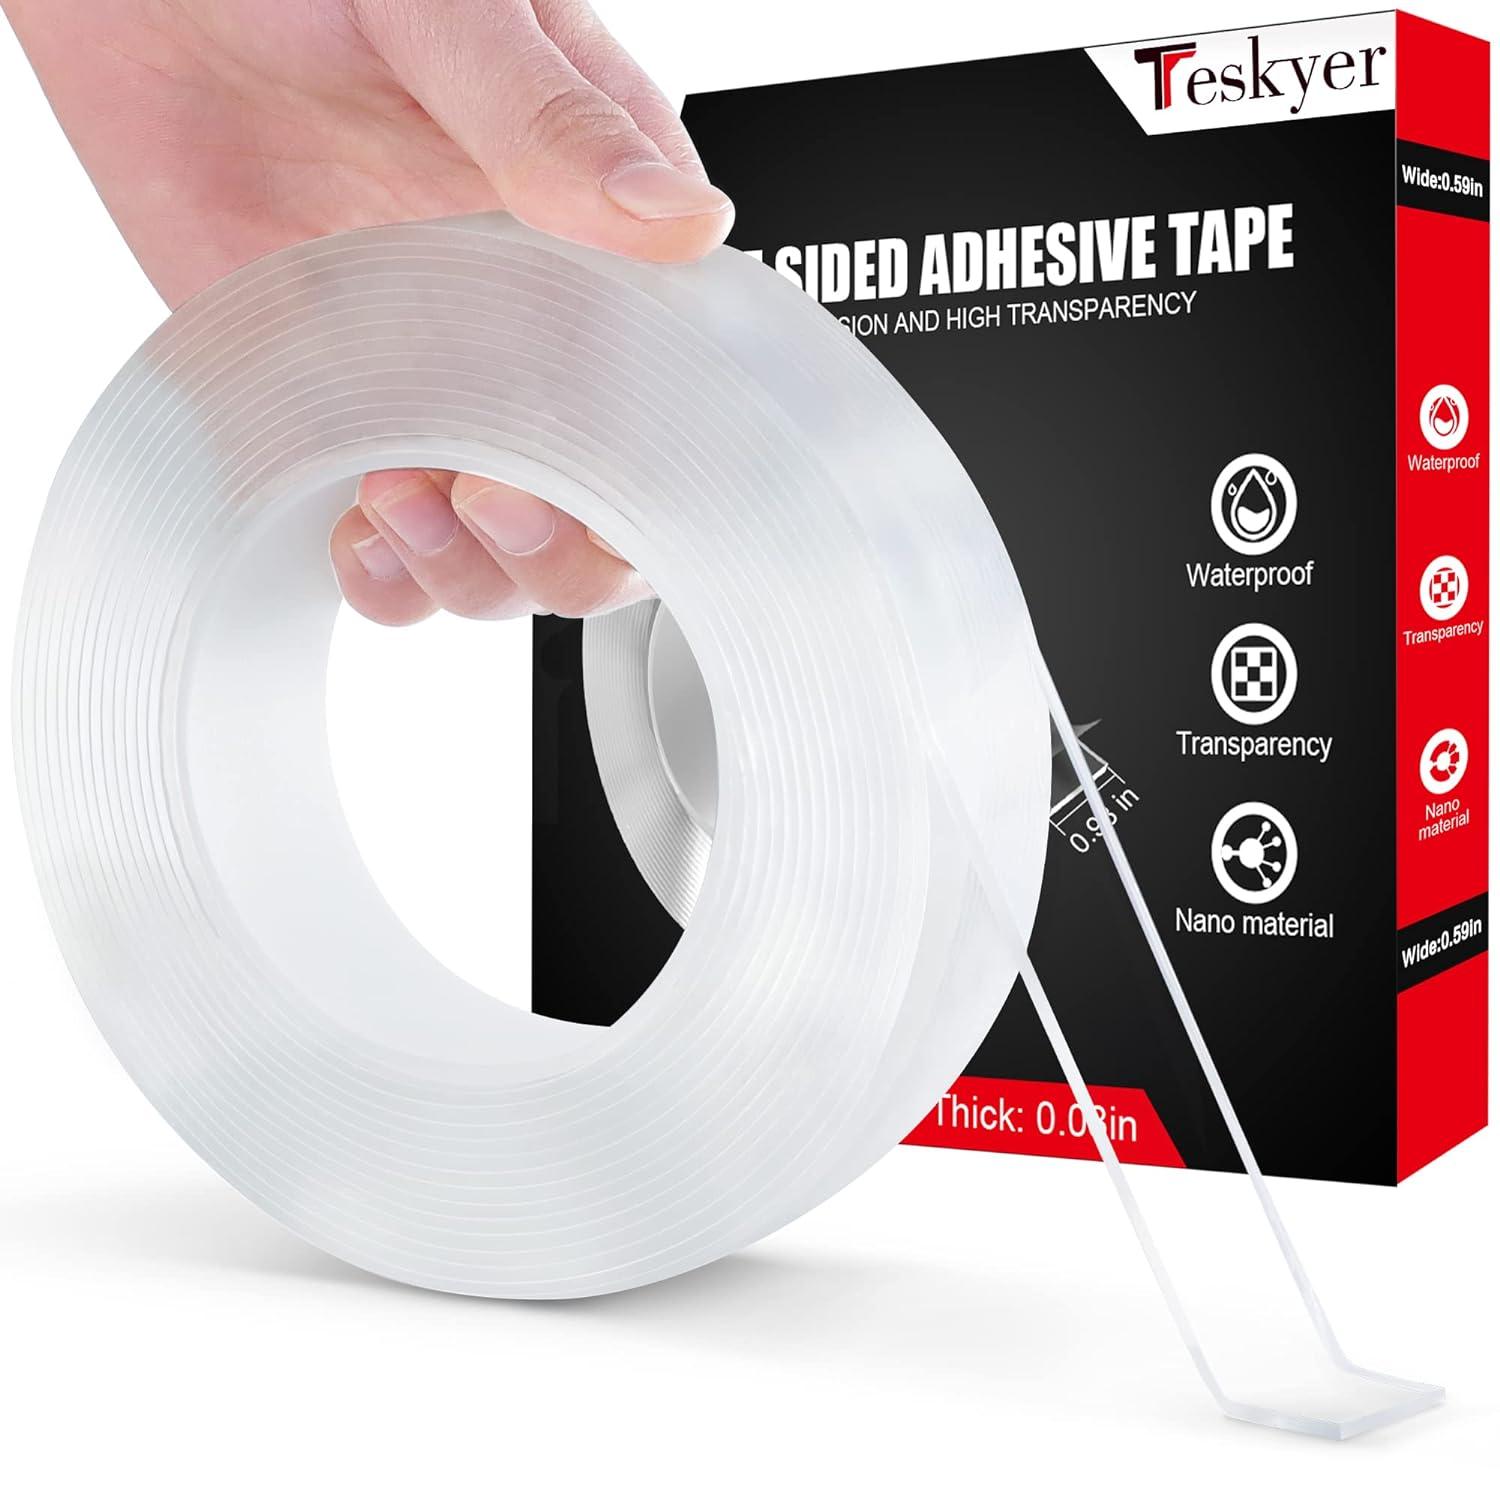 teskyer double sided tape heavy duty strong adhesive multipurpose mounting tape removable and reusable